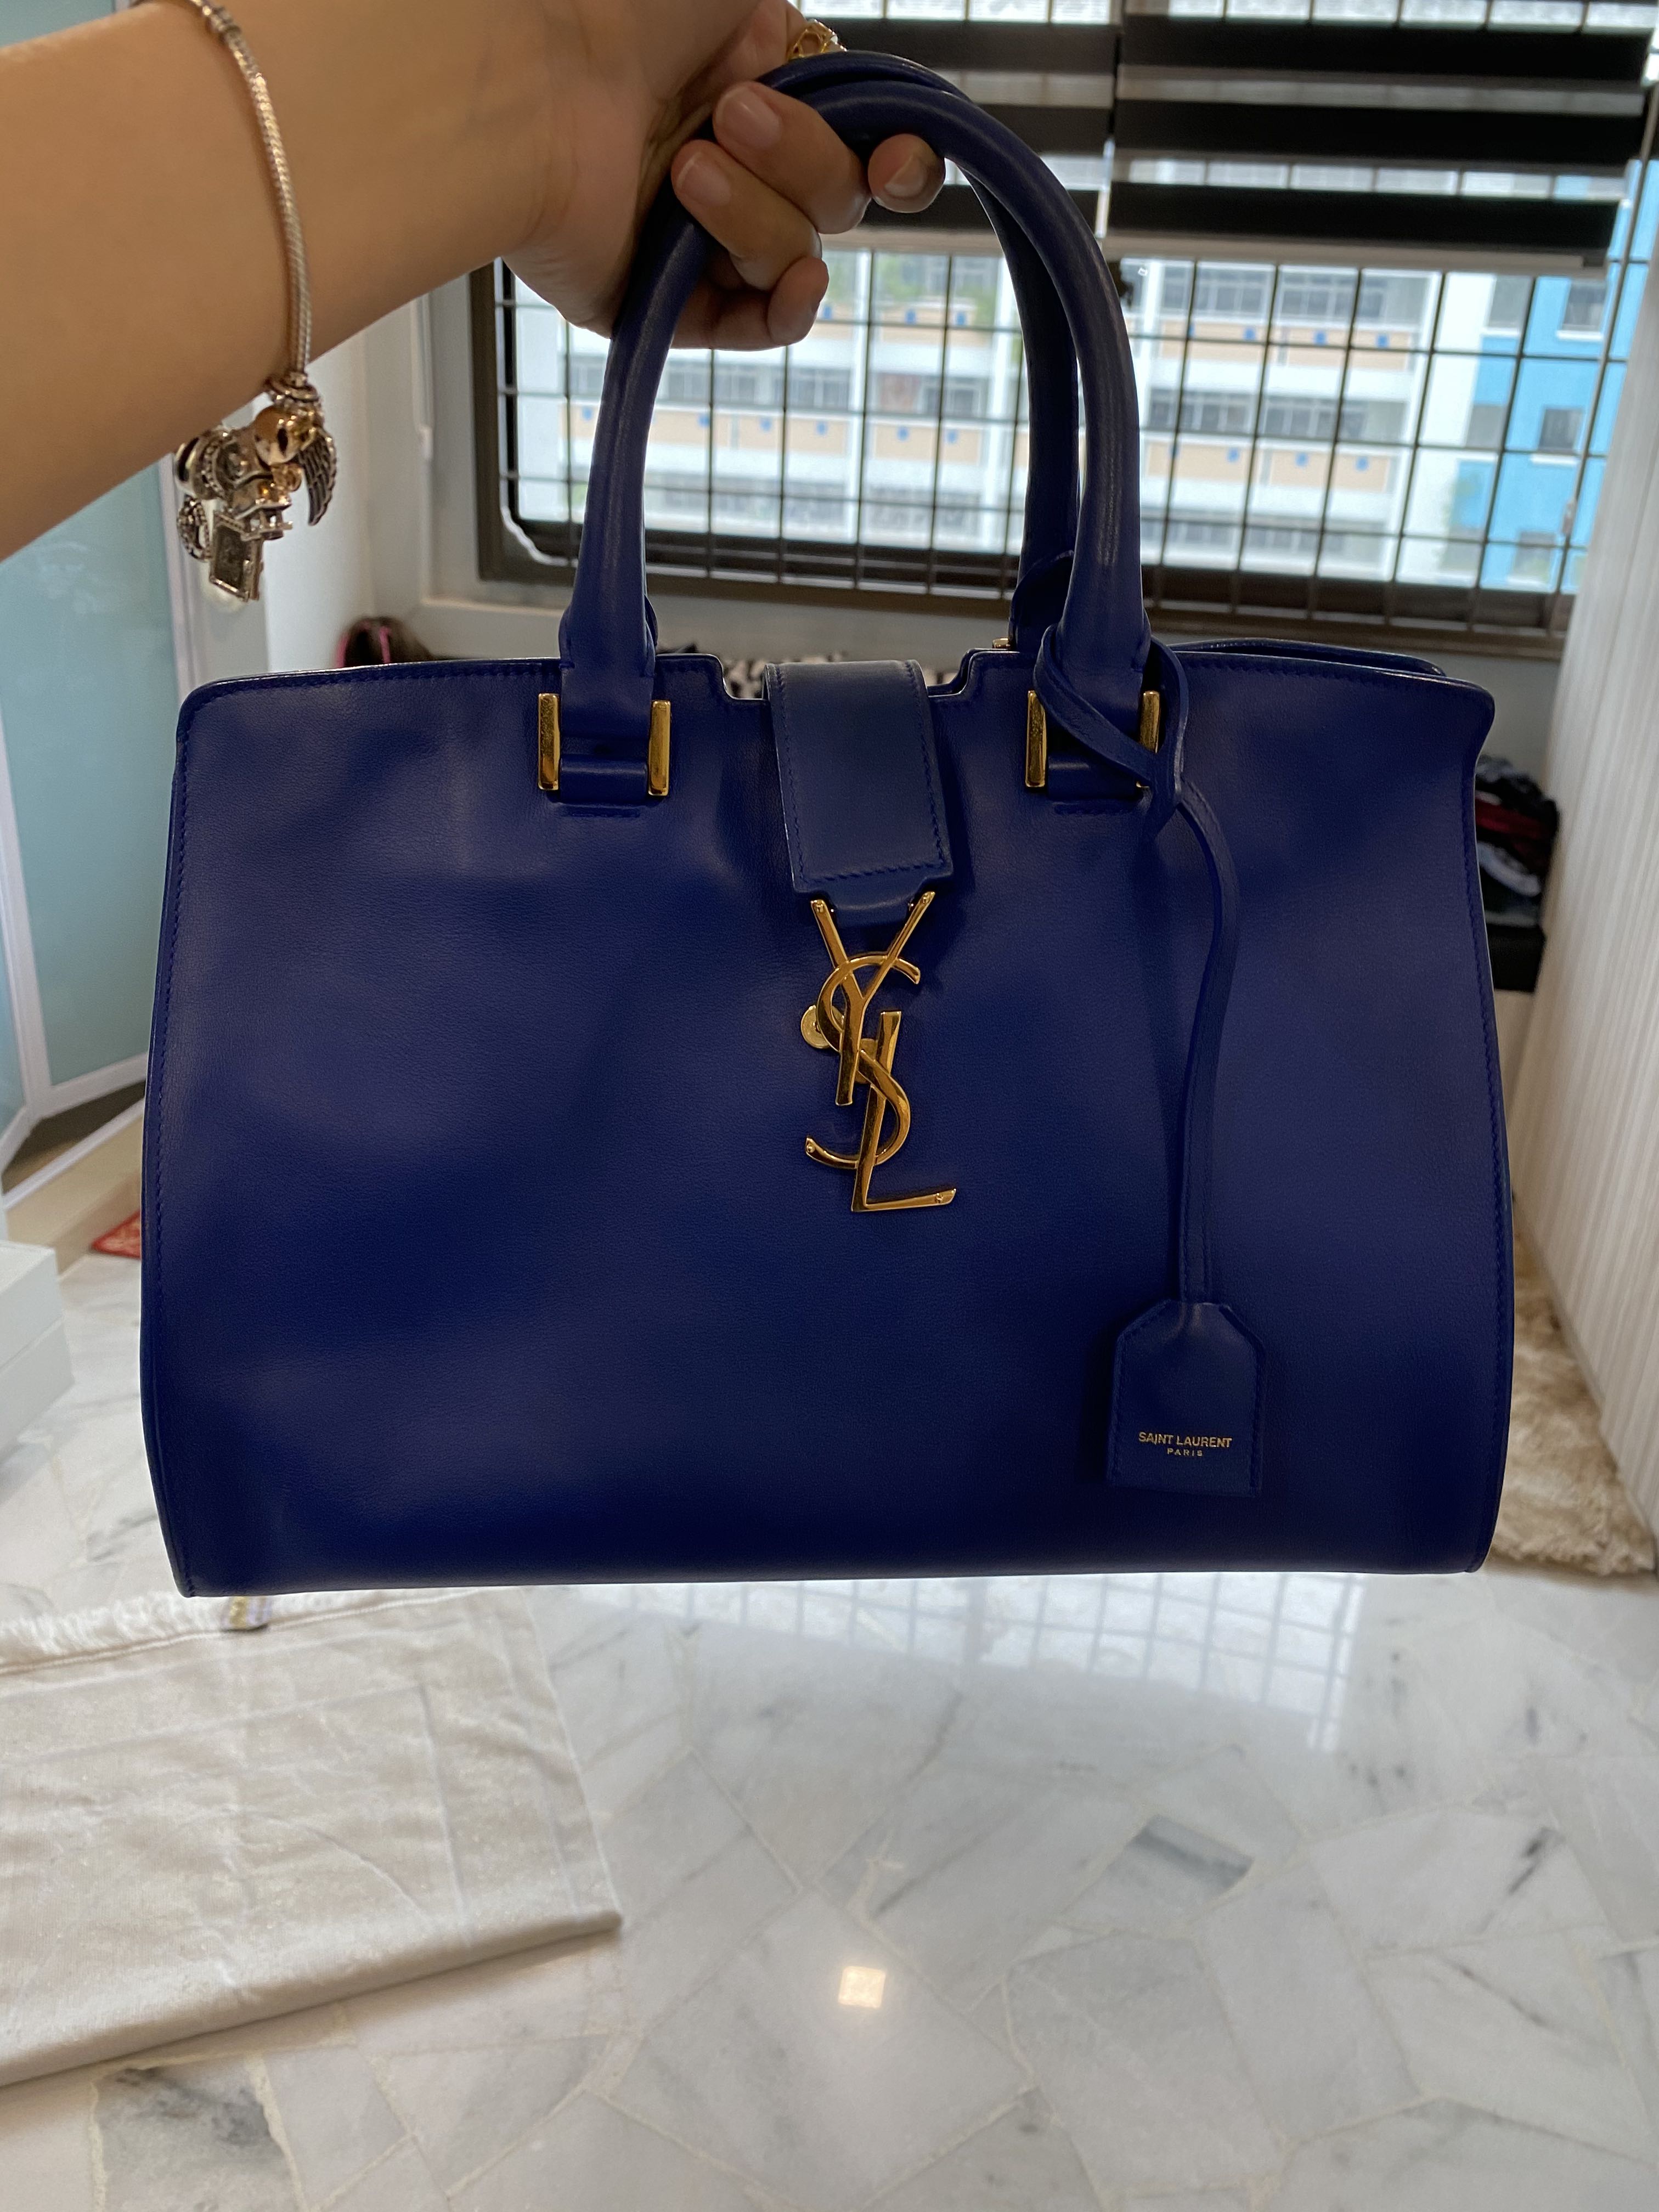 ysl cabas small size